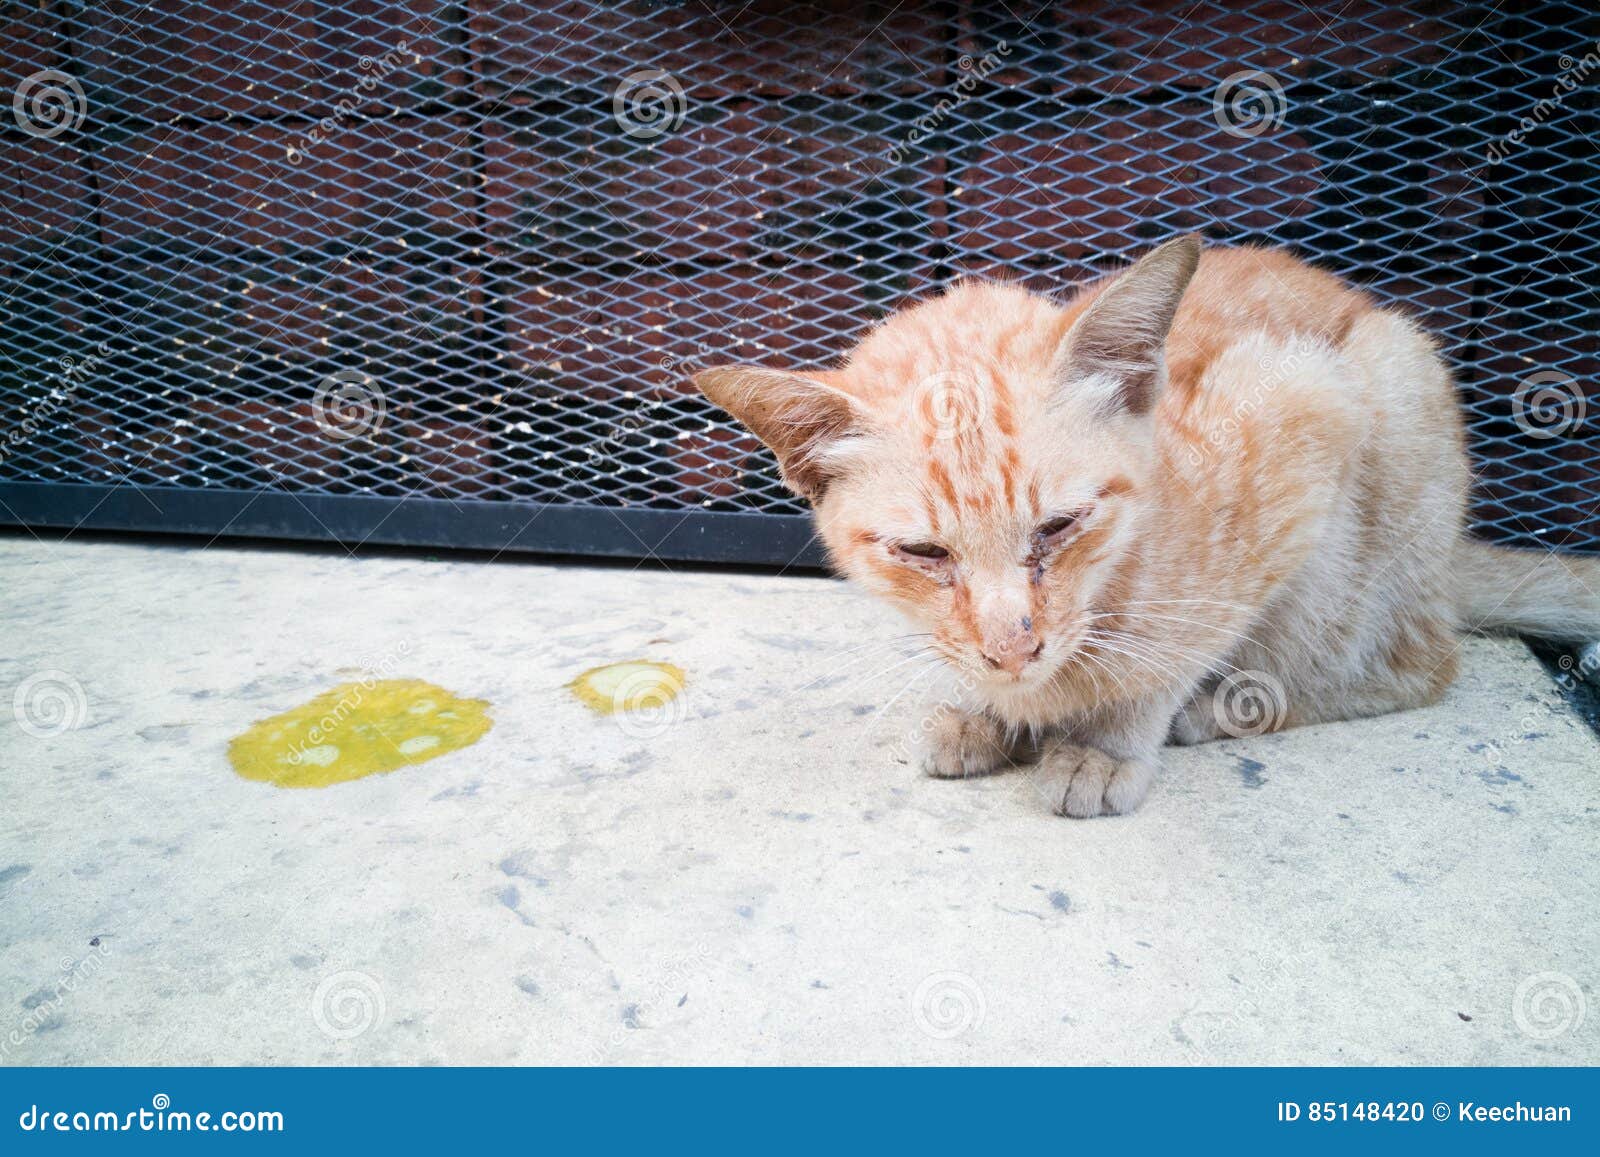 Sick Ill Pet Cat With Vomit On Floor Stock Photo Image of quirky